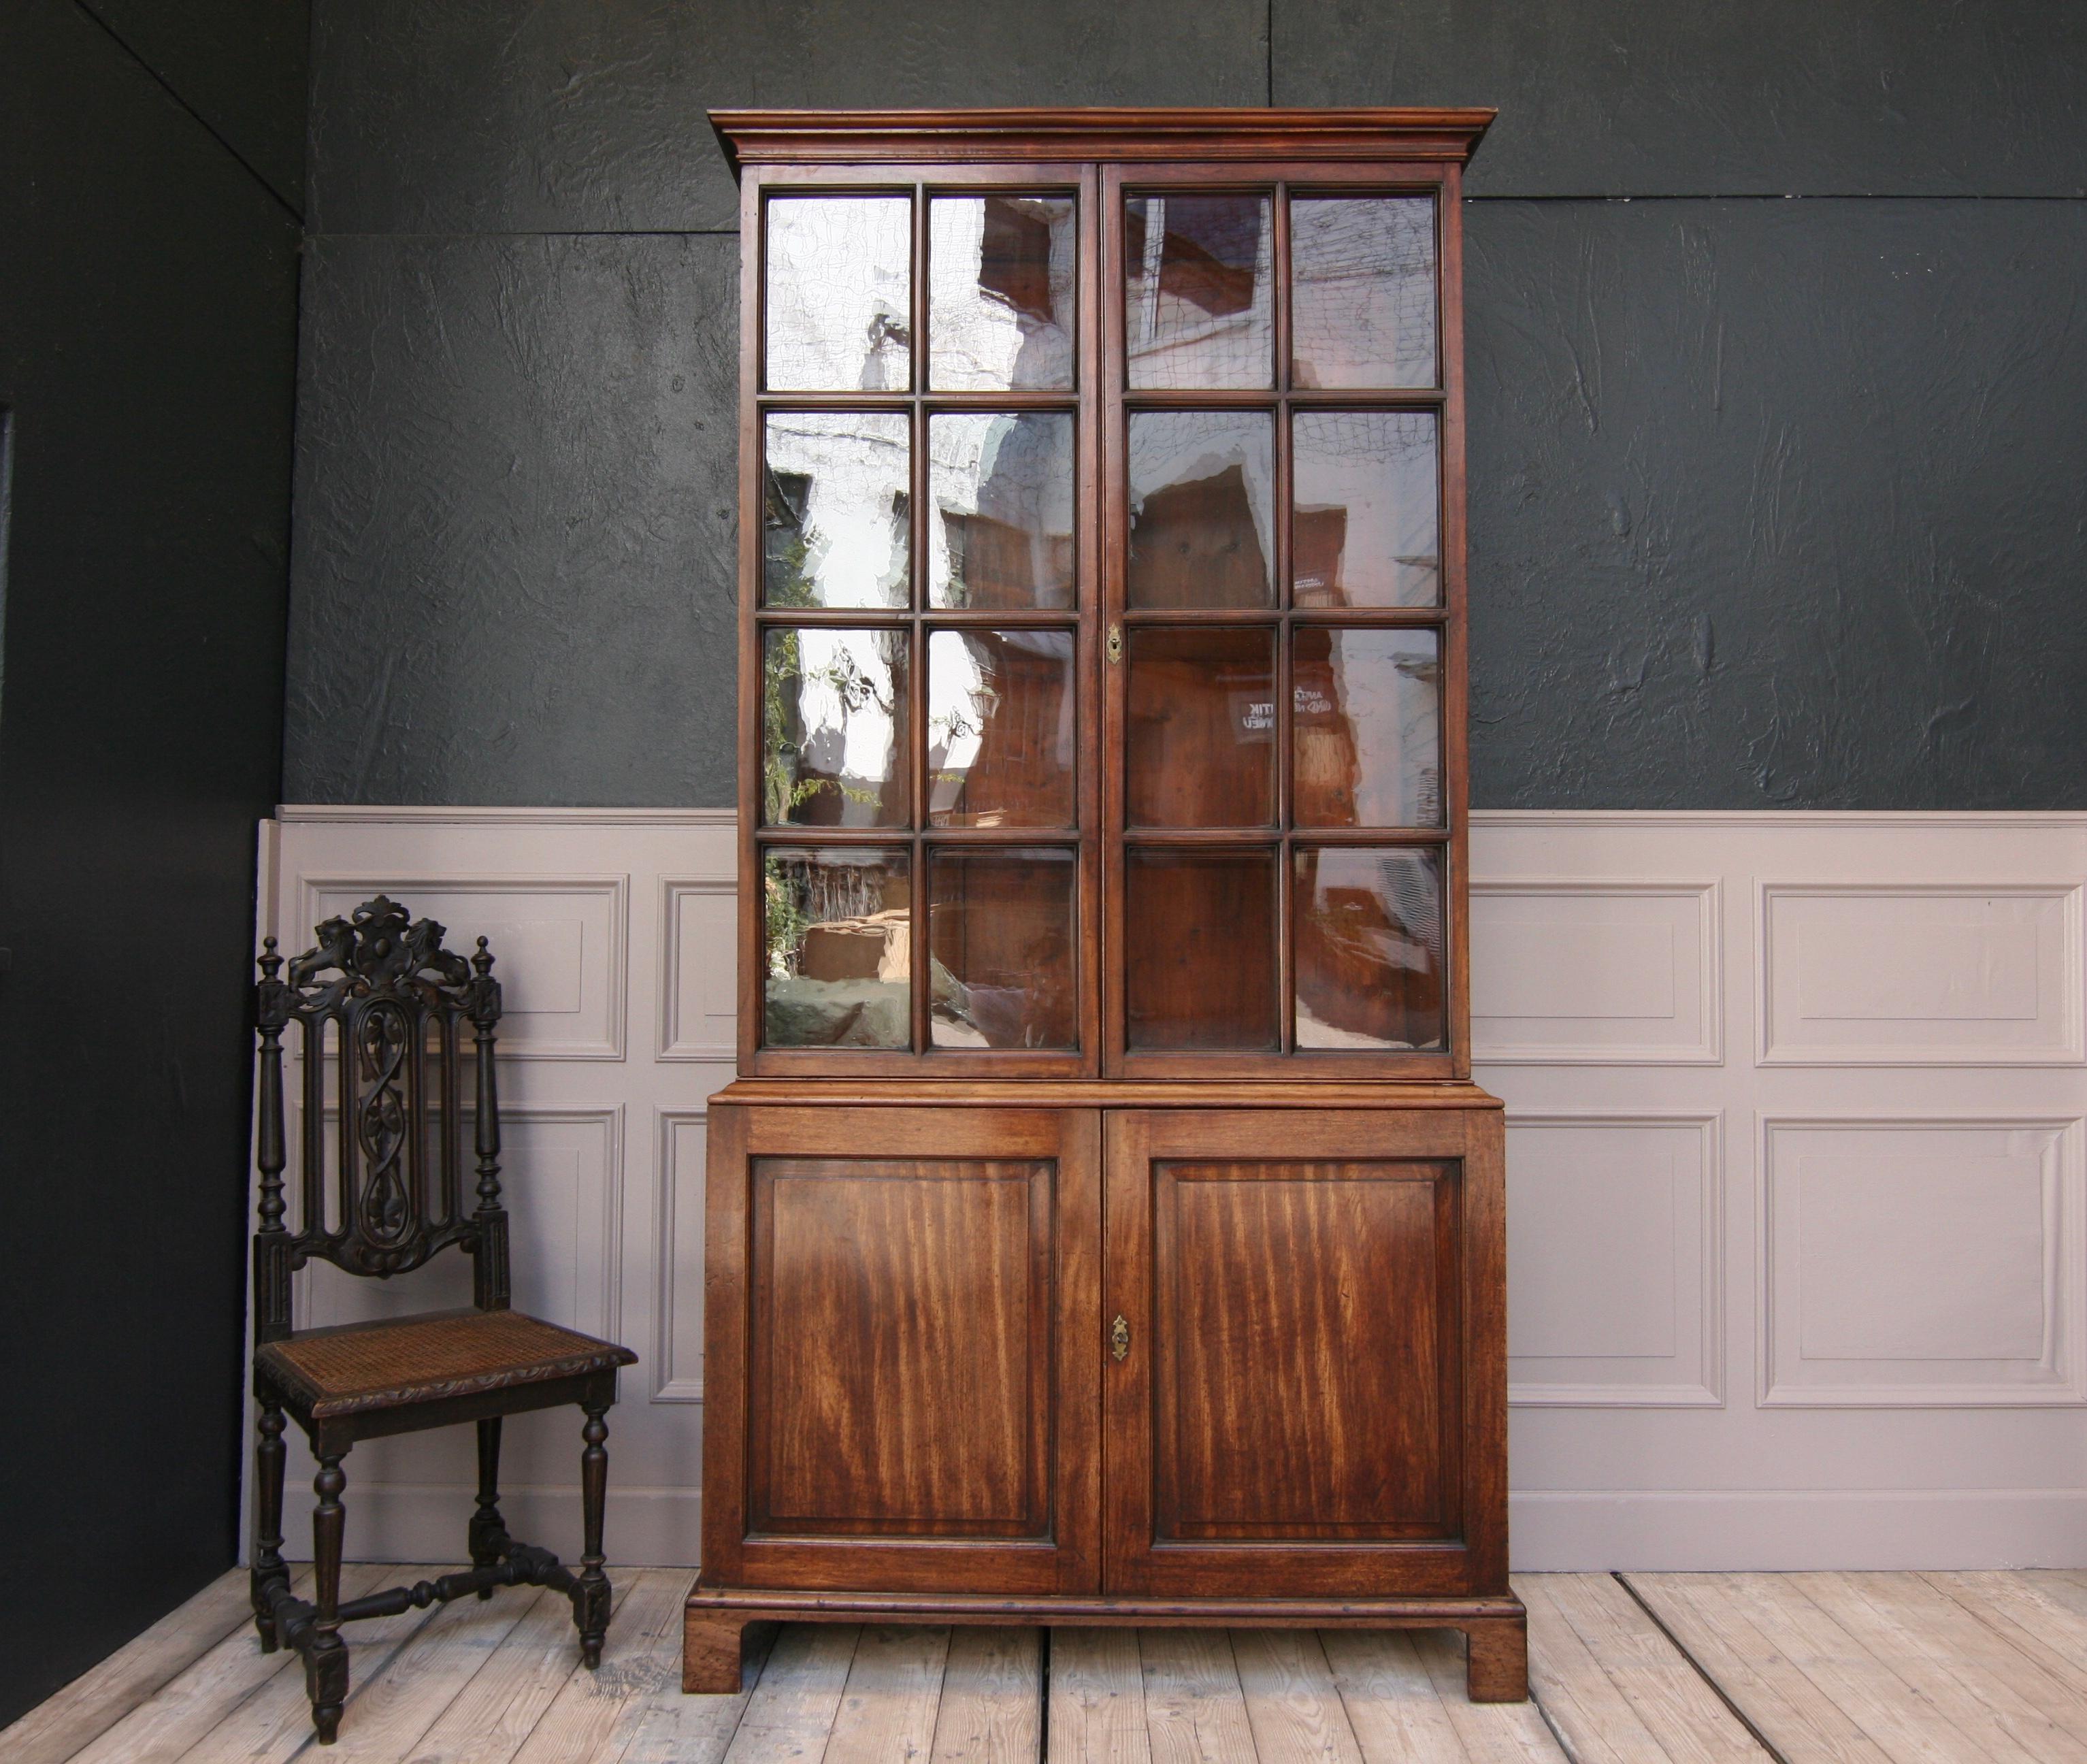 English mahogany bookcase or china cabinet, circa from the early 19th century.

Consisting of a base cabinet with 2 doors and a tall display case, also with 2 doors (with the original mouth blown glass), with 3 adjustable